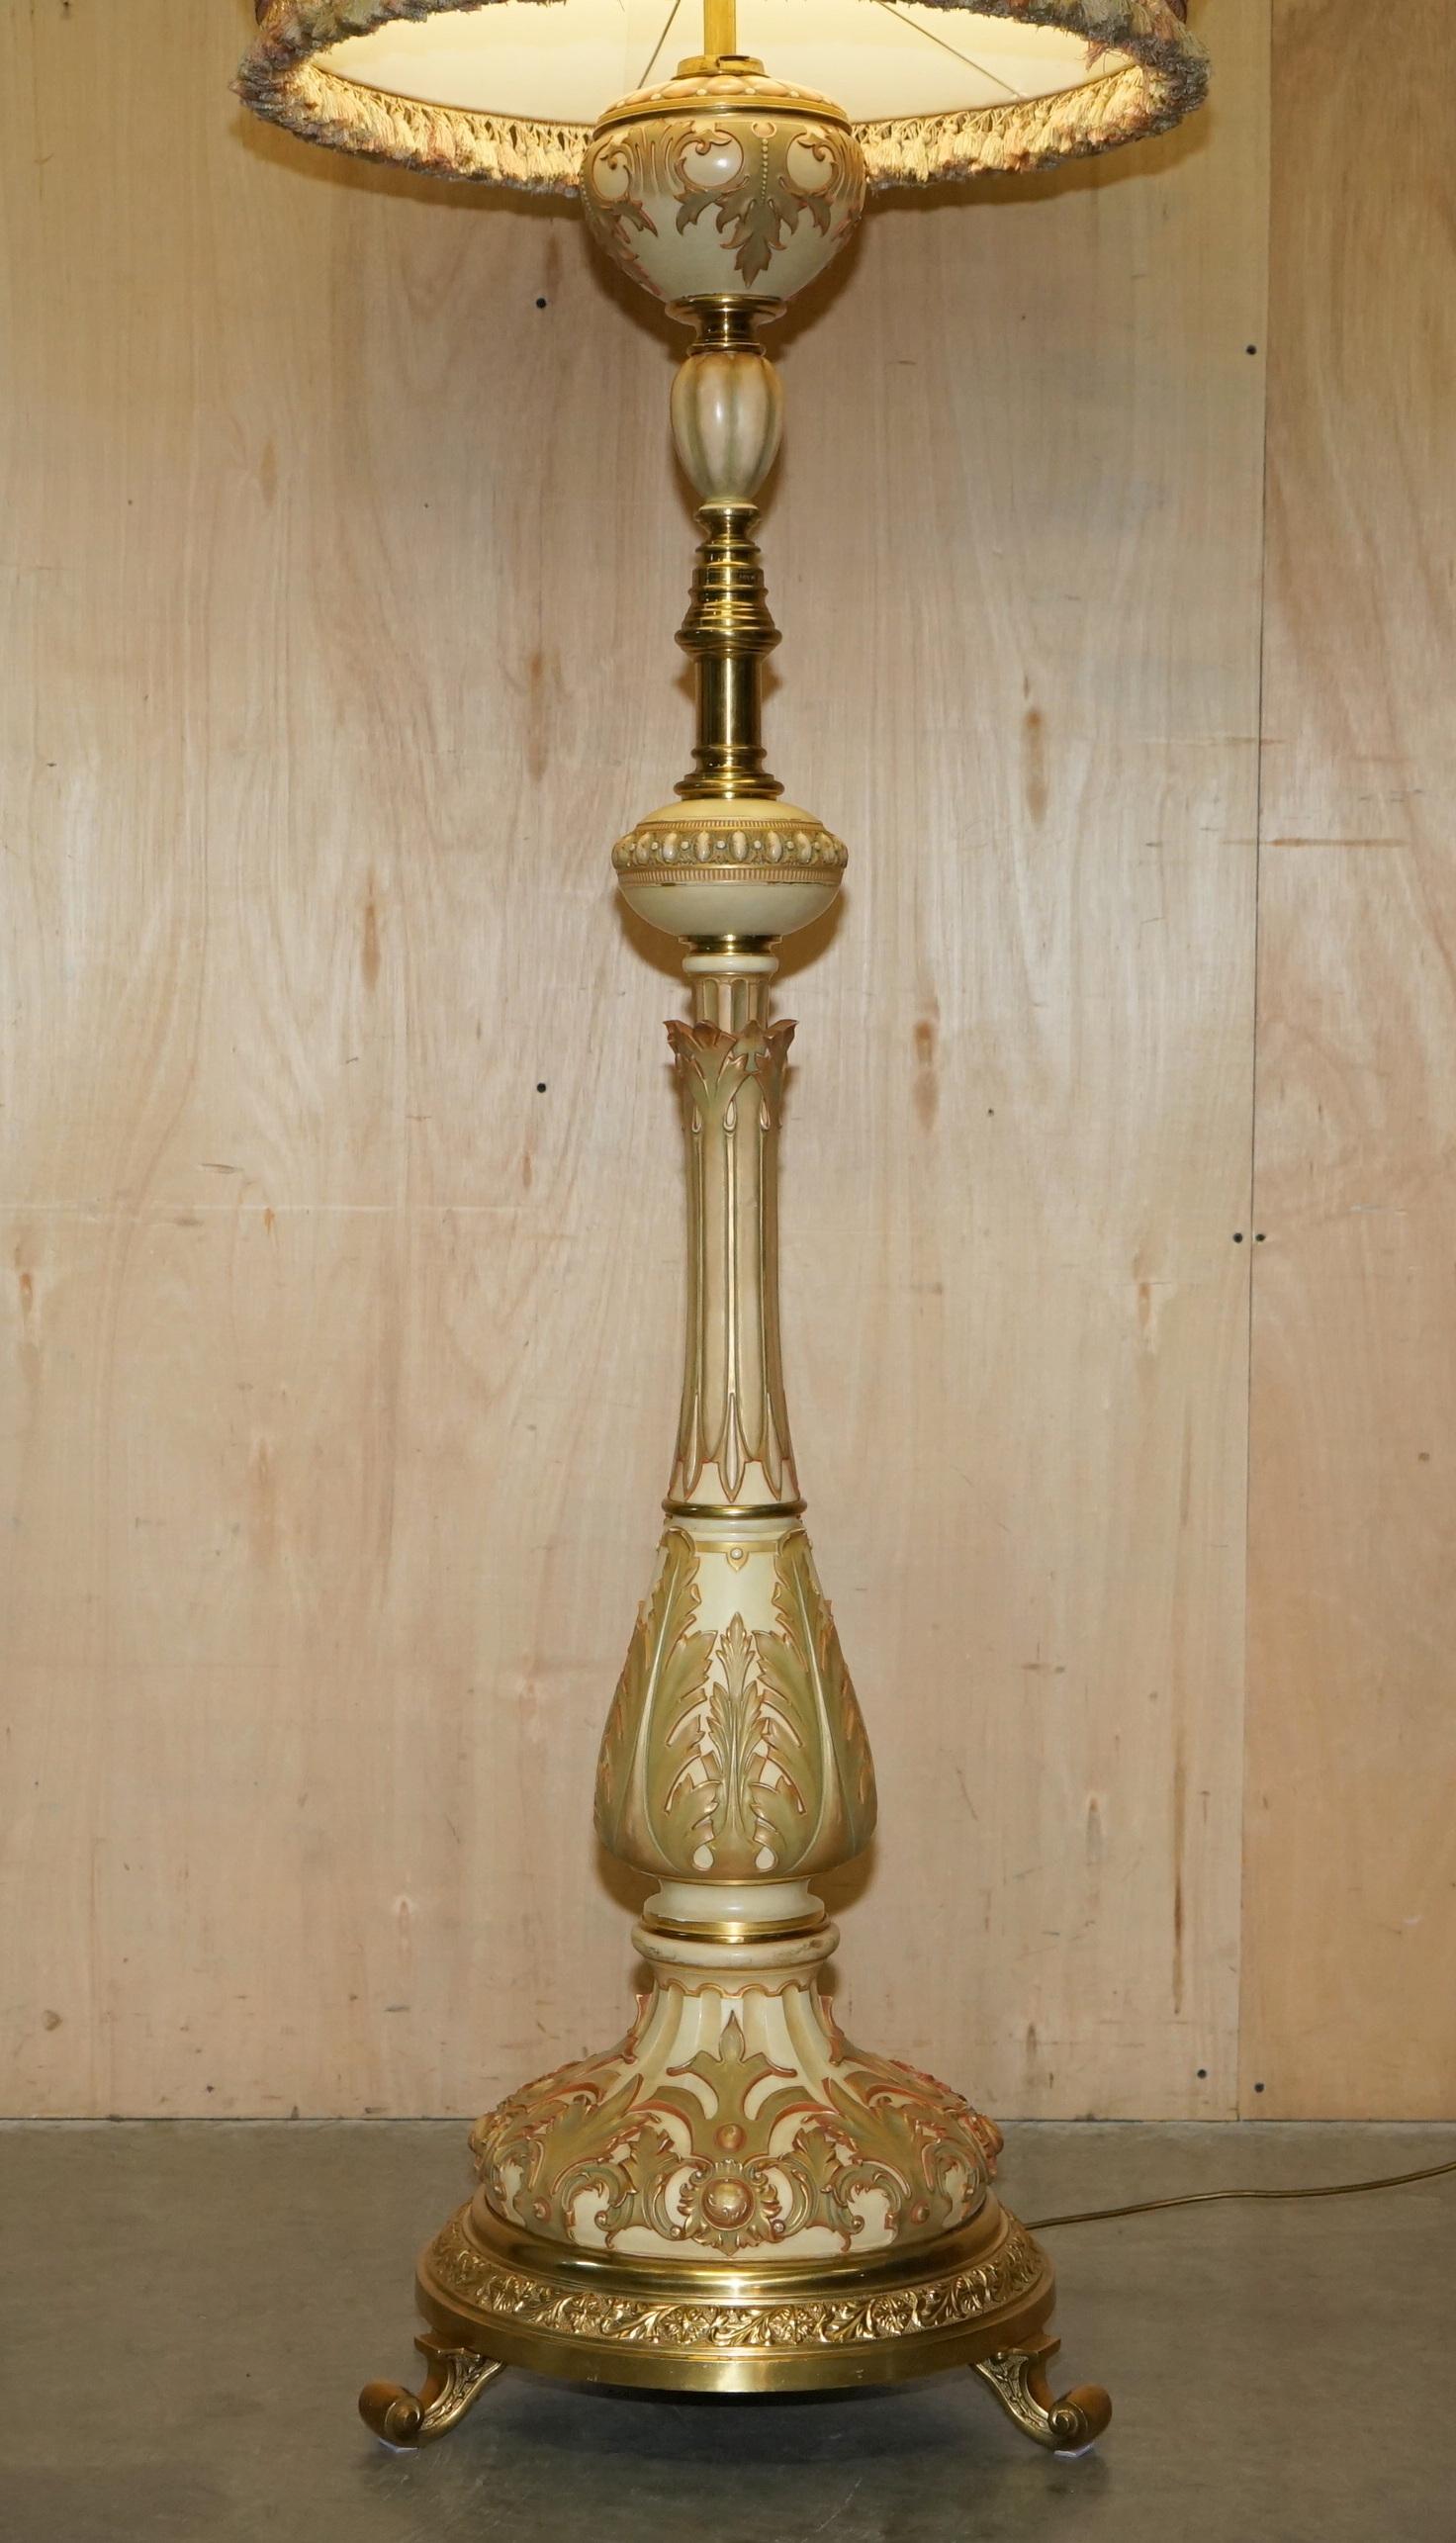 Late Victorian 1890 ROYAL WORCESTER FULLY STAMPED ANTIQUE ViCTORIAN FLOOR STANDING LAMP For Sale